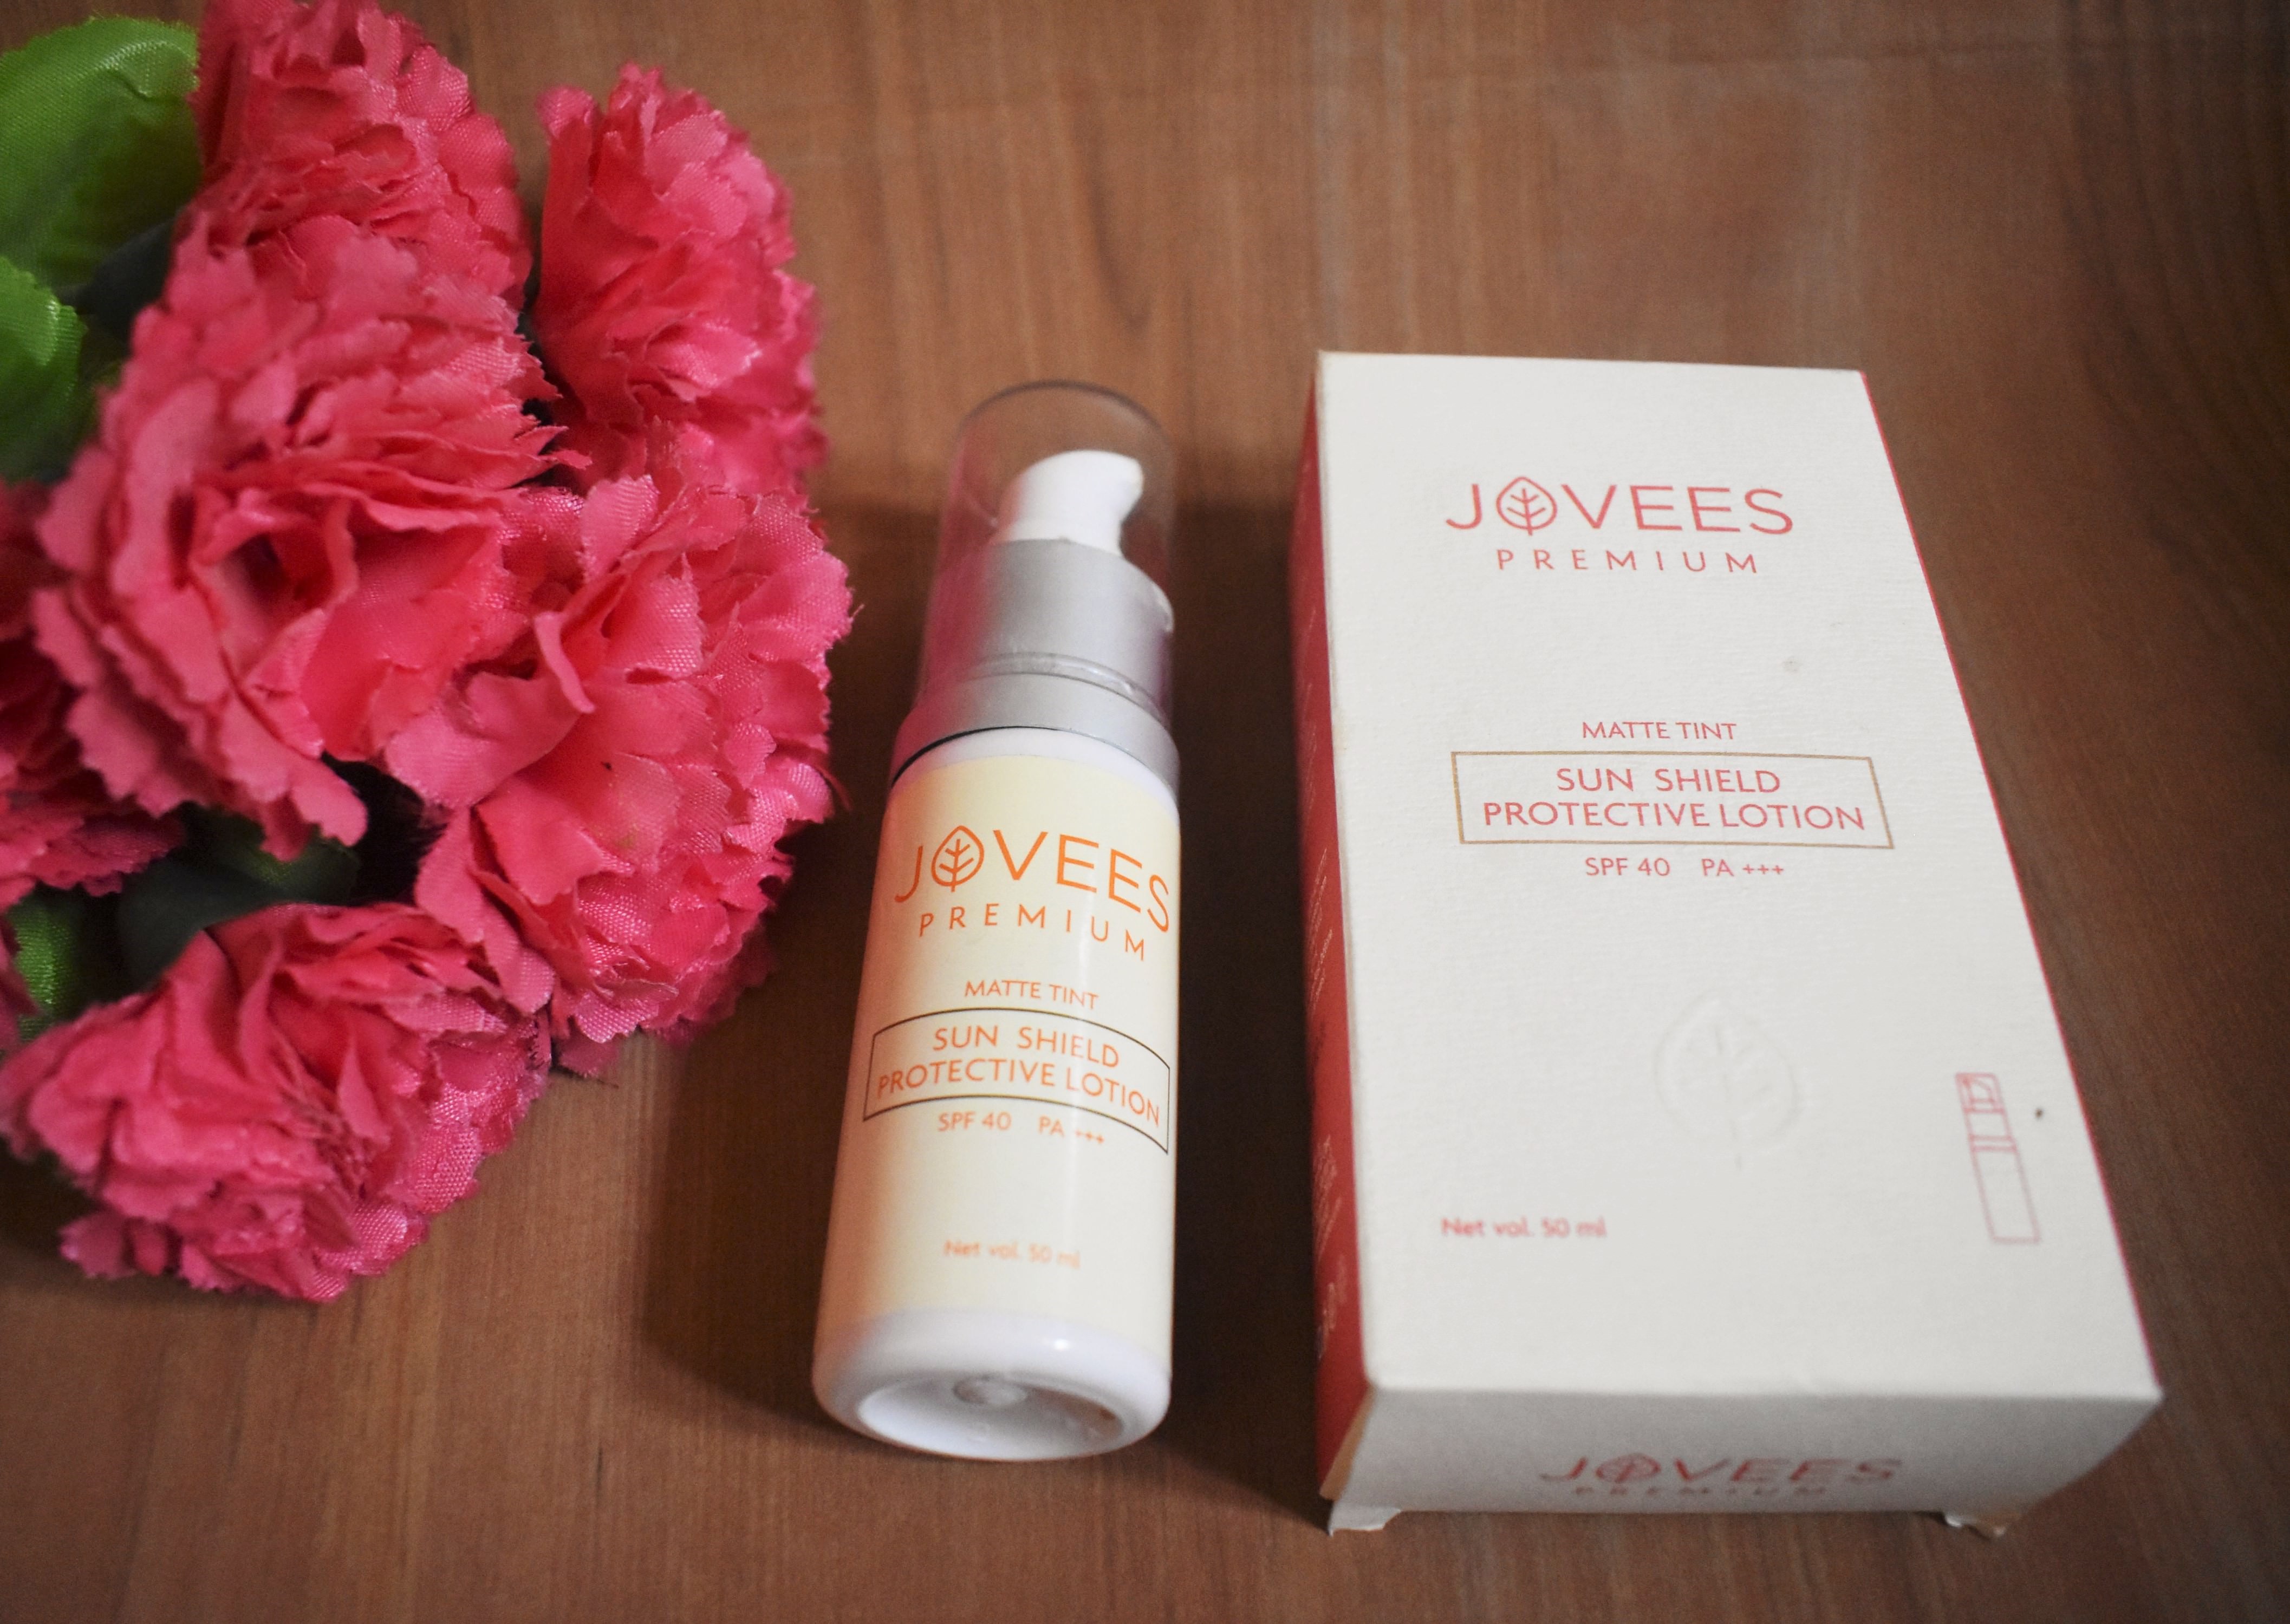 Jovees Premium Sun Shield Protective Lotion SPF 40 Review